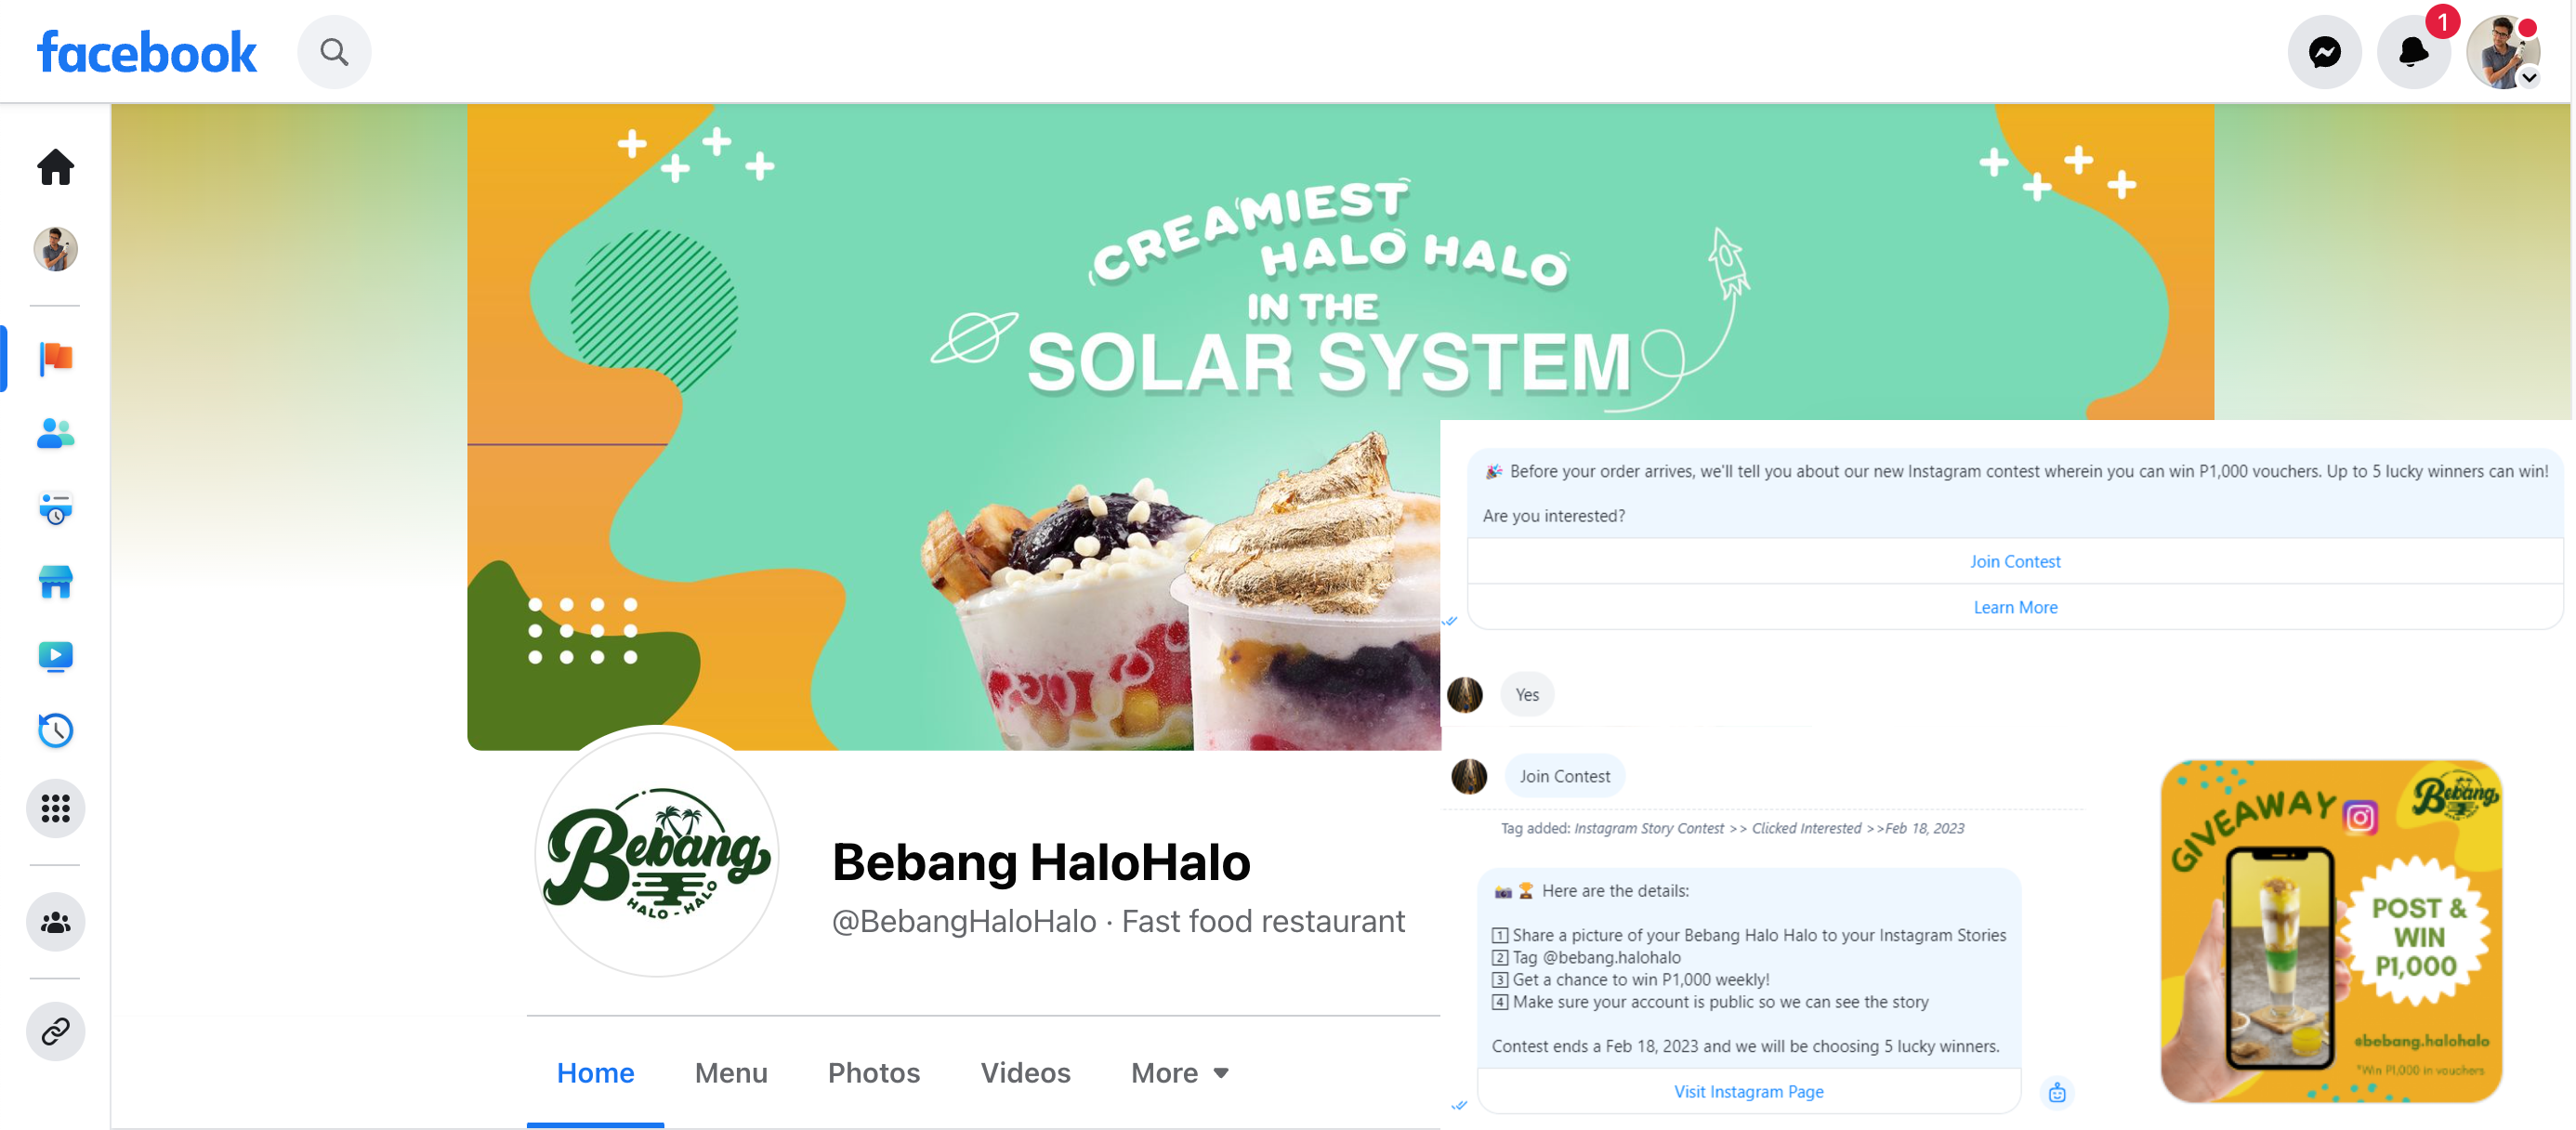 Bebang HaloHalo Communication of their Instagram Stories Giveaway